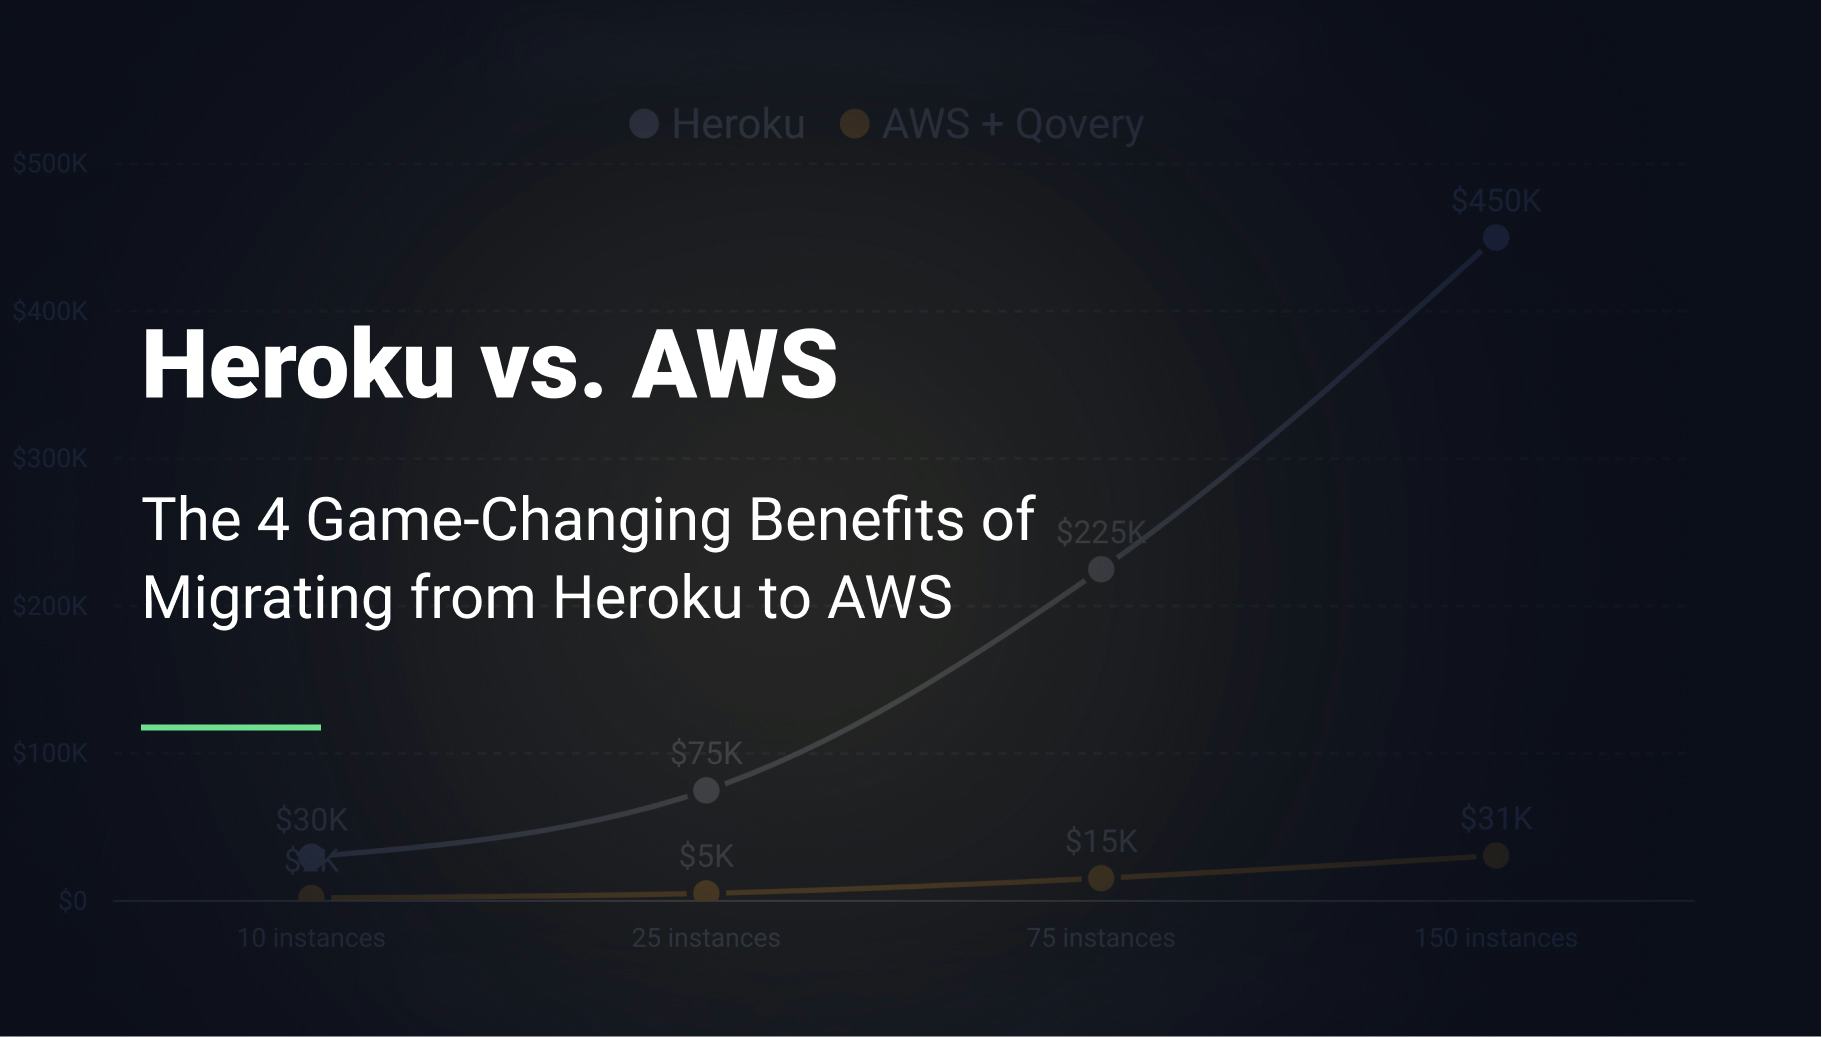 The 4 Game-Changing Benefits of Migrating from Heroku to AWS